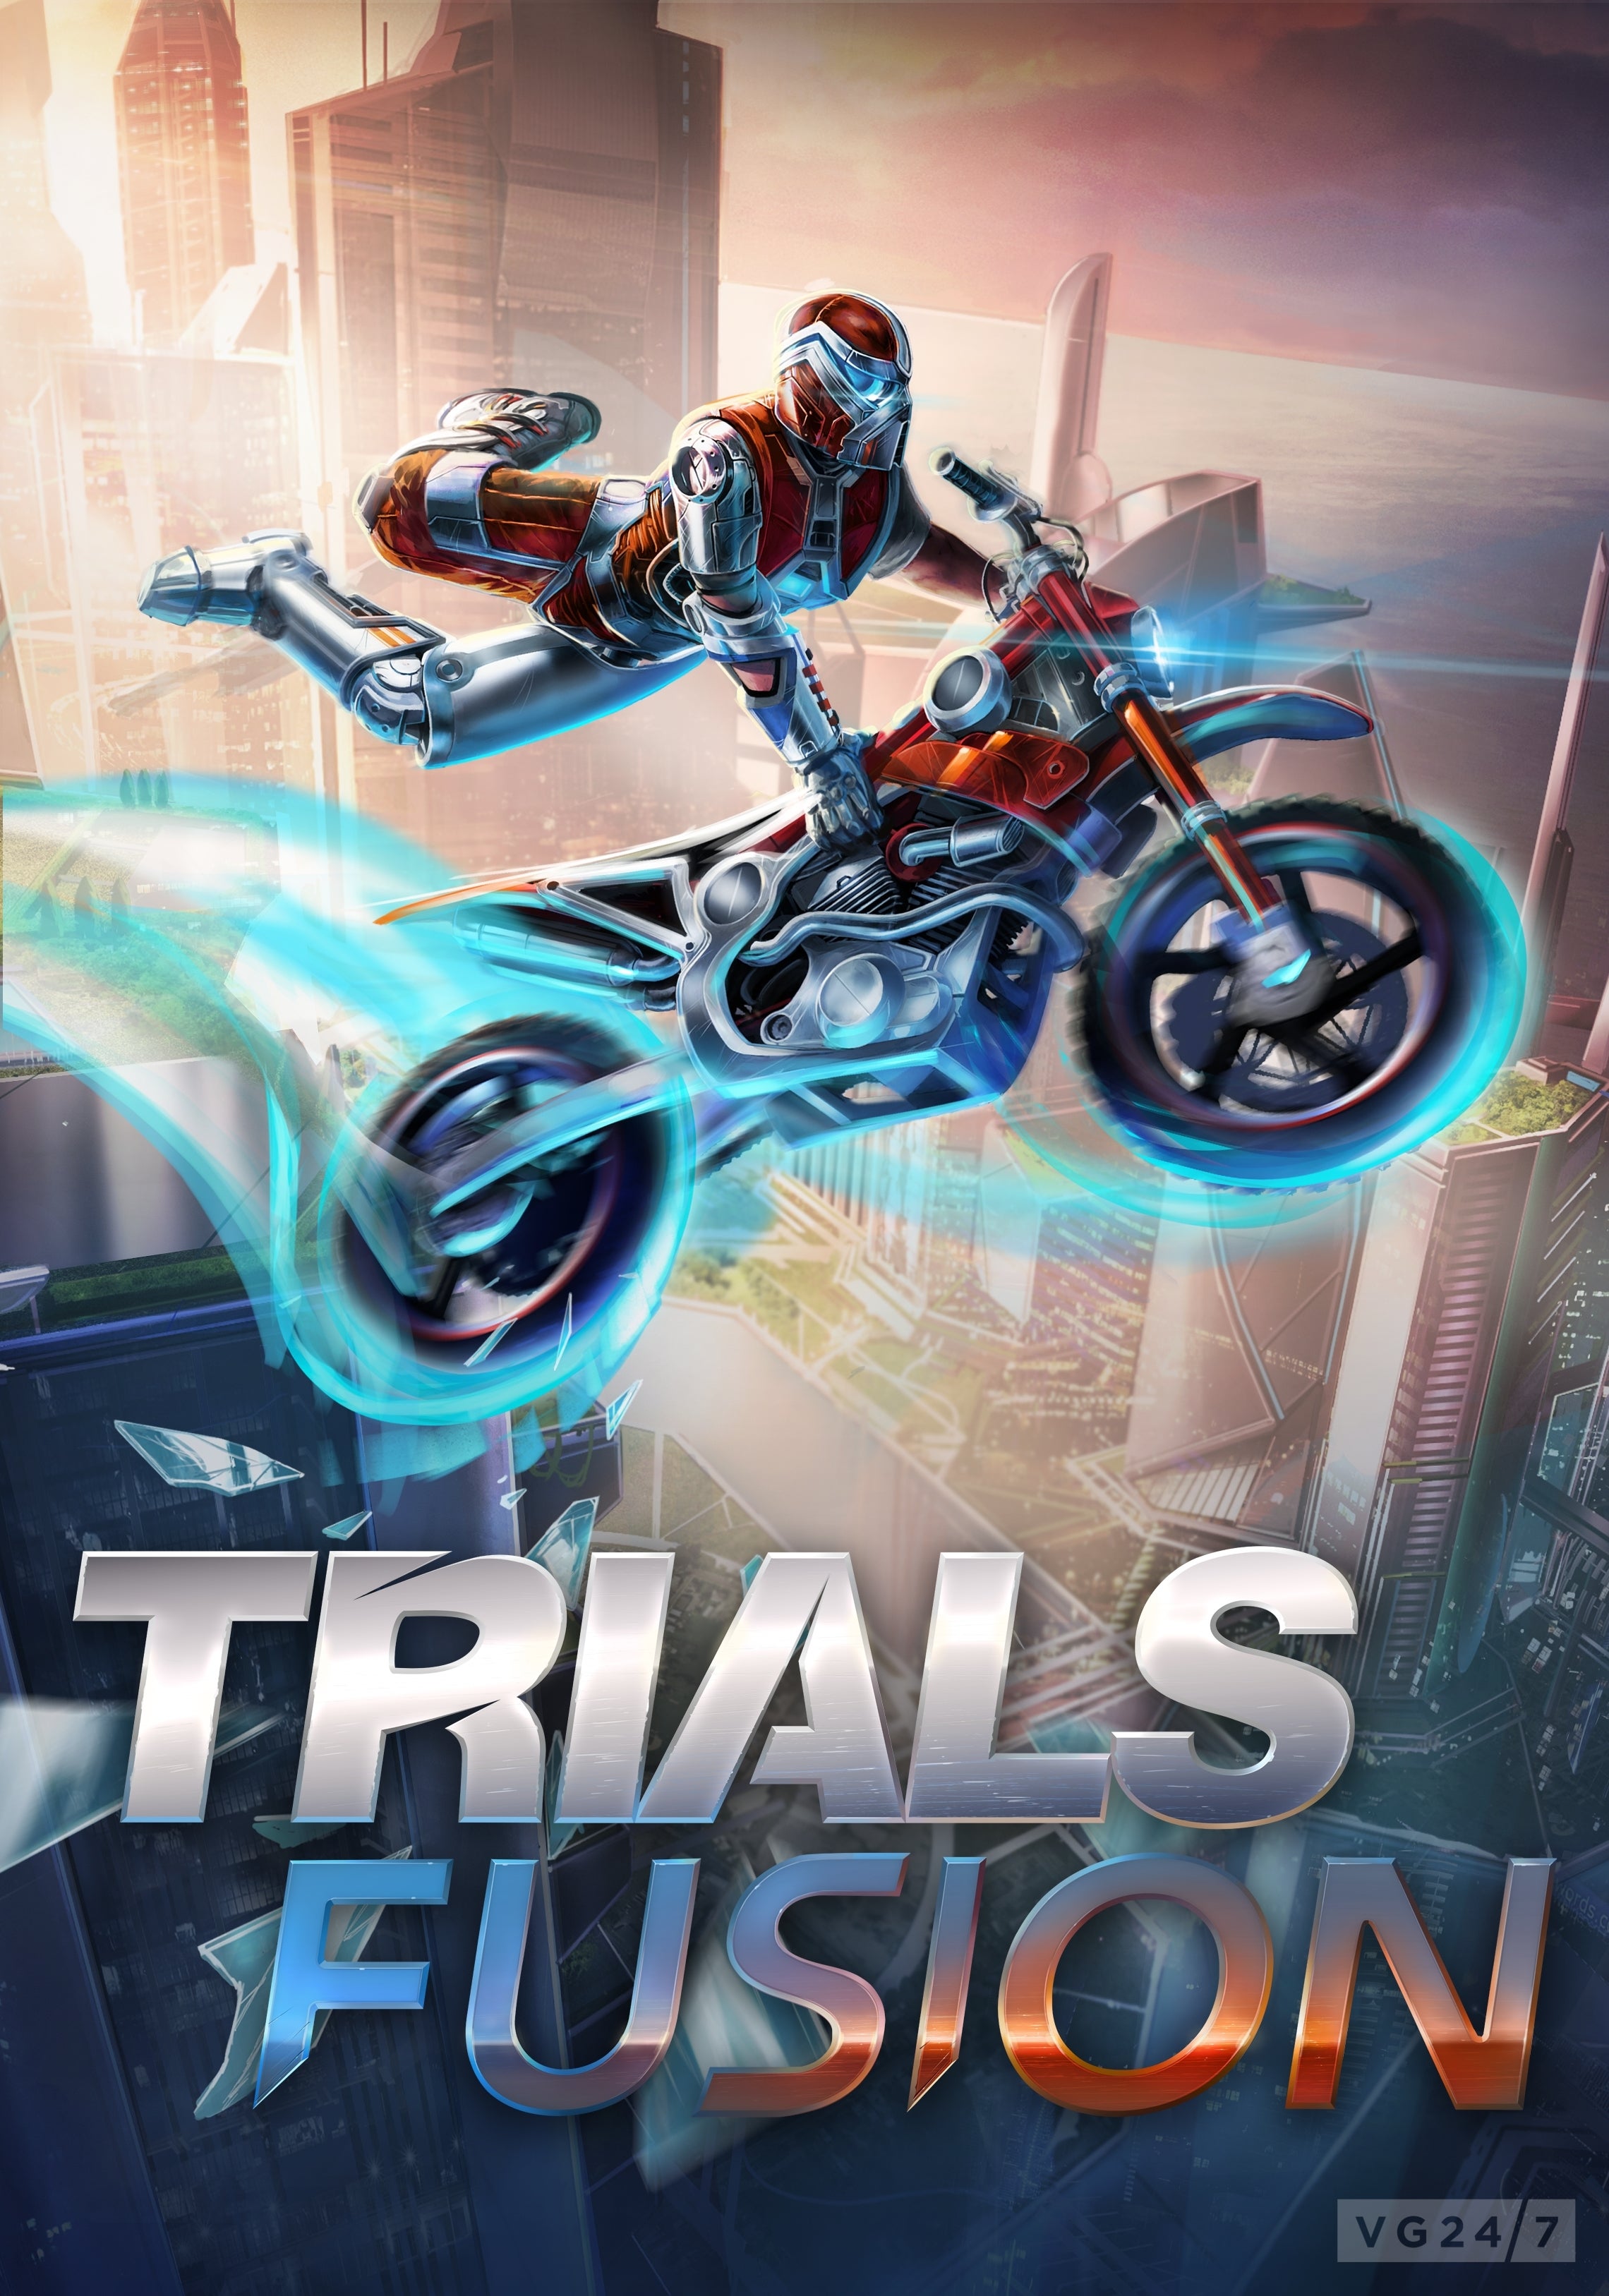 Image for Ubisoft announces Trials Fusion: Awesome Level MAX edition